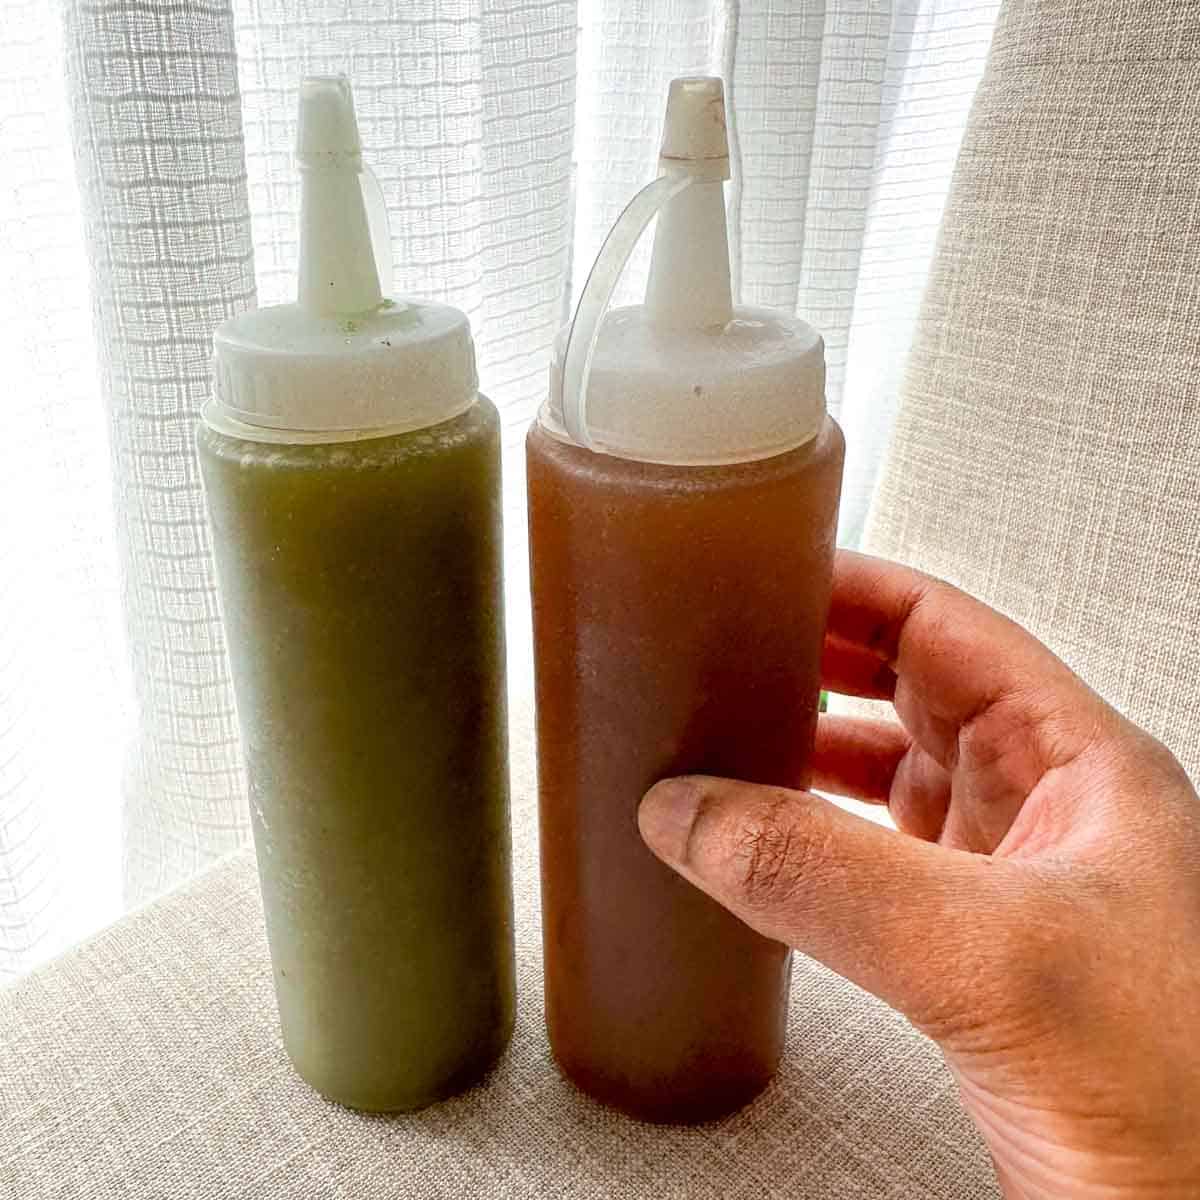 Pani puri bottles with pani. Spicy green pani on the left and sweet tamarind pani on the right